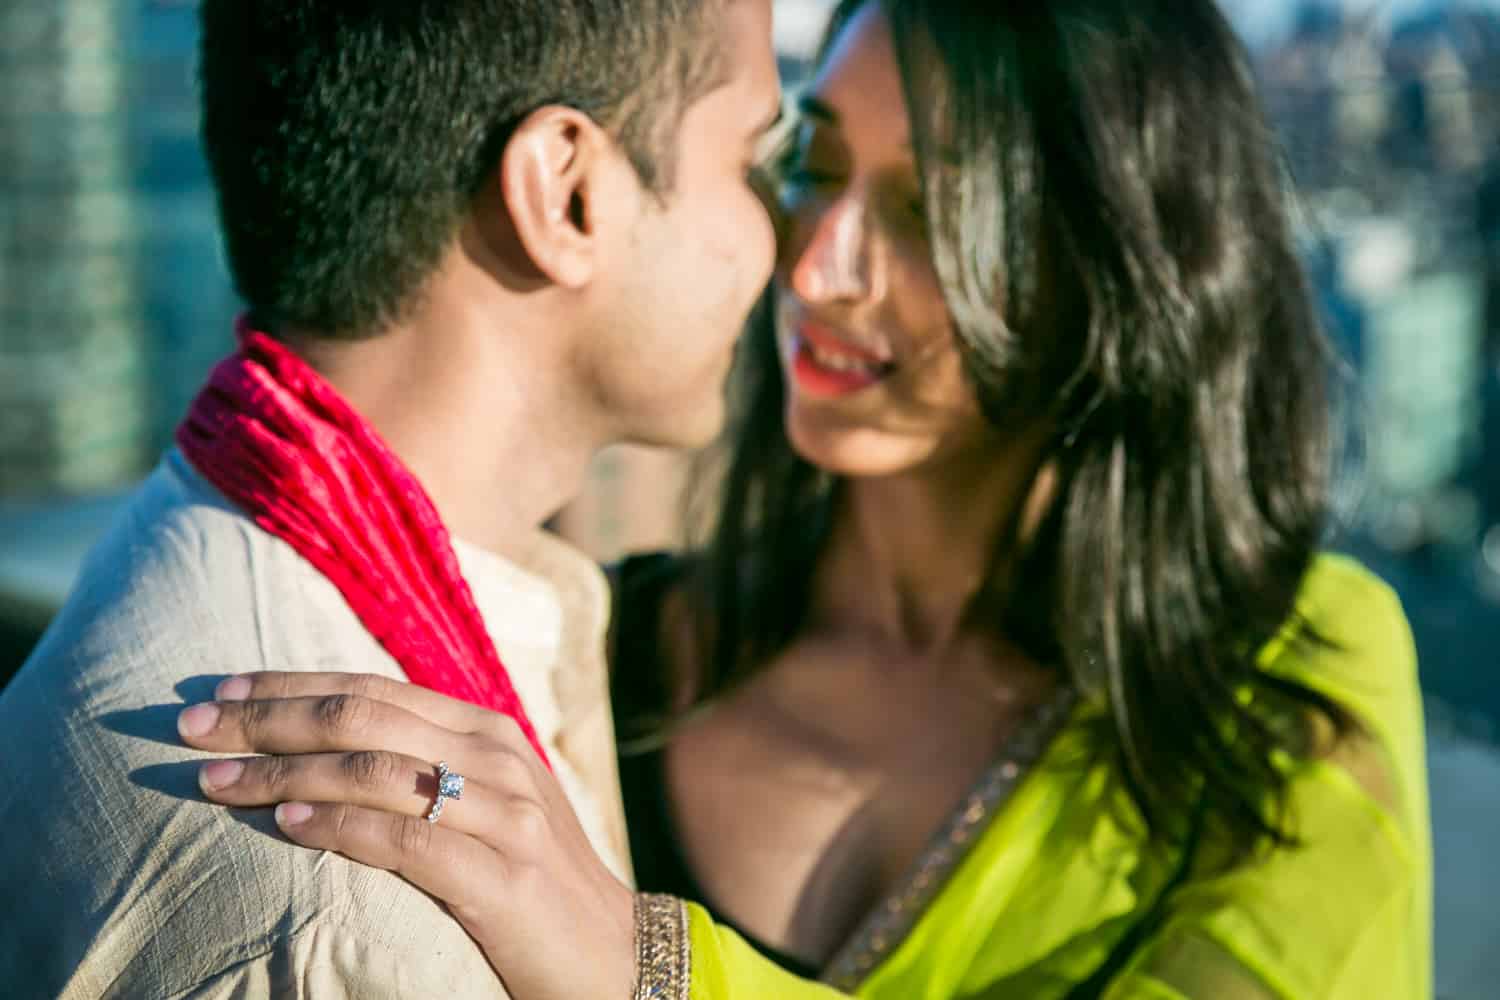 Woman's hand on man's shoulder wearing engagement ring and traditional Indian attire